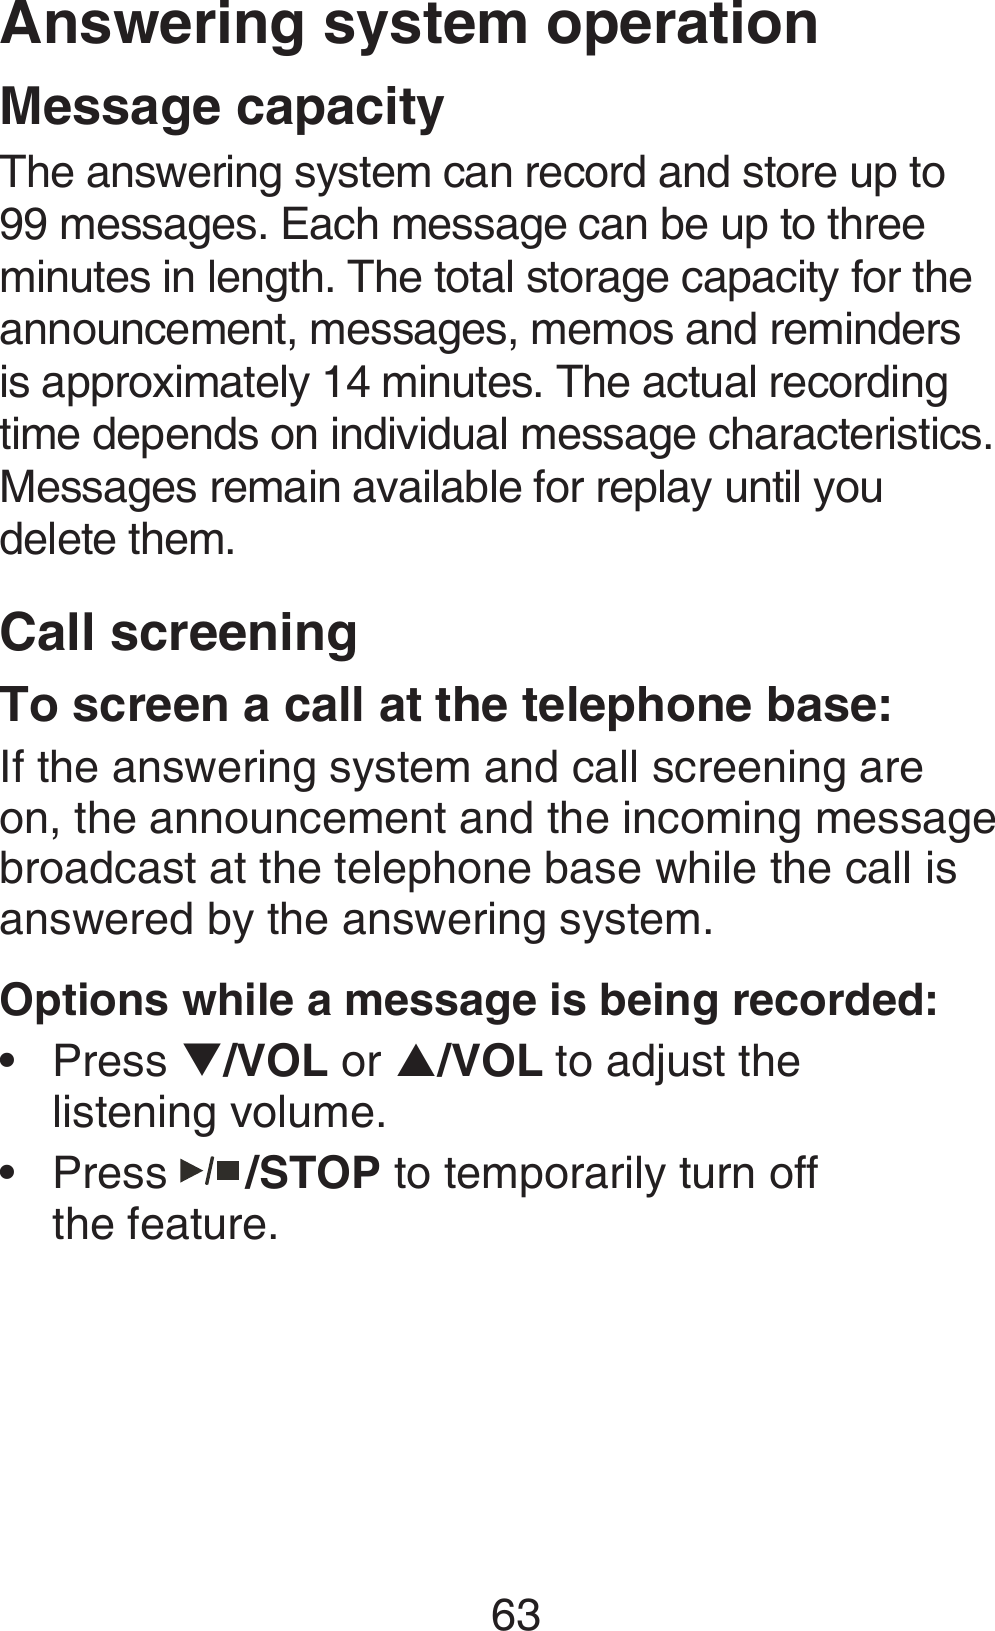 63Answering system operationMessage capacityThe answering system can record and store up to 99 messages. Each message can be up to three minutes in length. The total storage capacity for the announcement, messages, memos and reminders is approximately 14 minutes. The actual recording time depends on individual message characteristics. Messages remain available for replay until you  delete them.Call screeningTo screen a call at the telephone base:If the answering system and call screening are on, the announcement and the incoming message broadcast at the telephone base while the call is answered by the answering system.Options while a message is being recorded:Press T/VOL or S/VOL to adjust the  listening volume.Press   /STOP to temporarily turn off  the feature.••